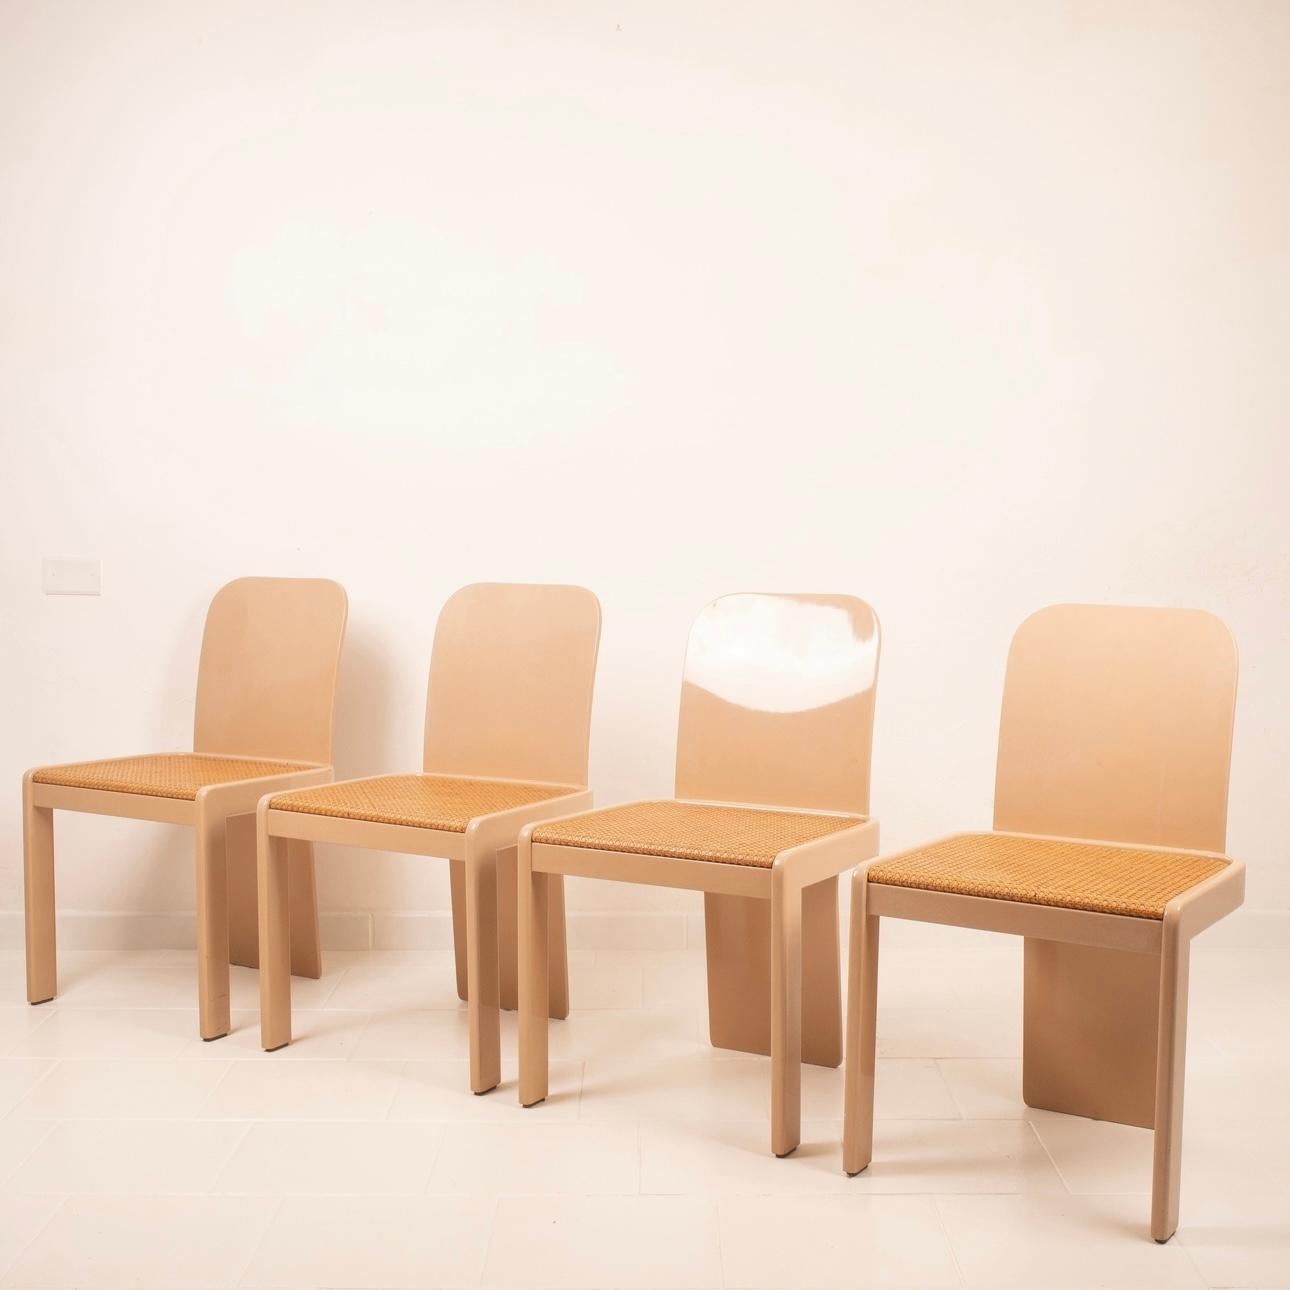 Set of 4 Chairs by Pierluigi Molinari for Pozzi For Sale 2